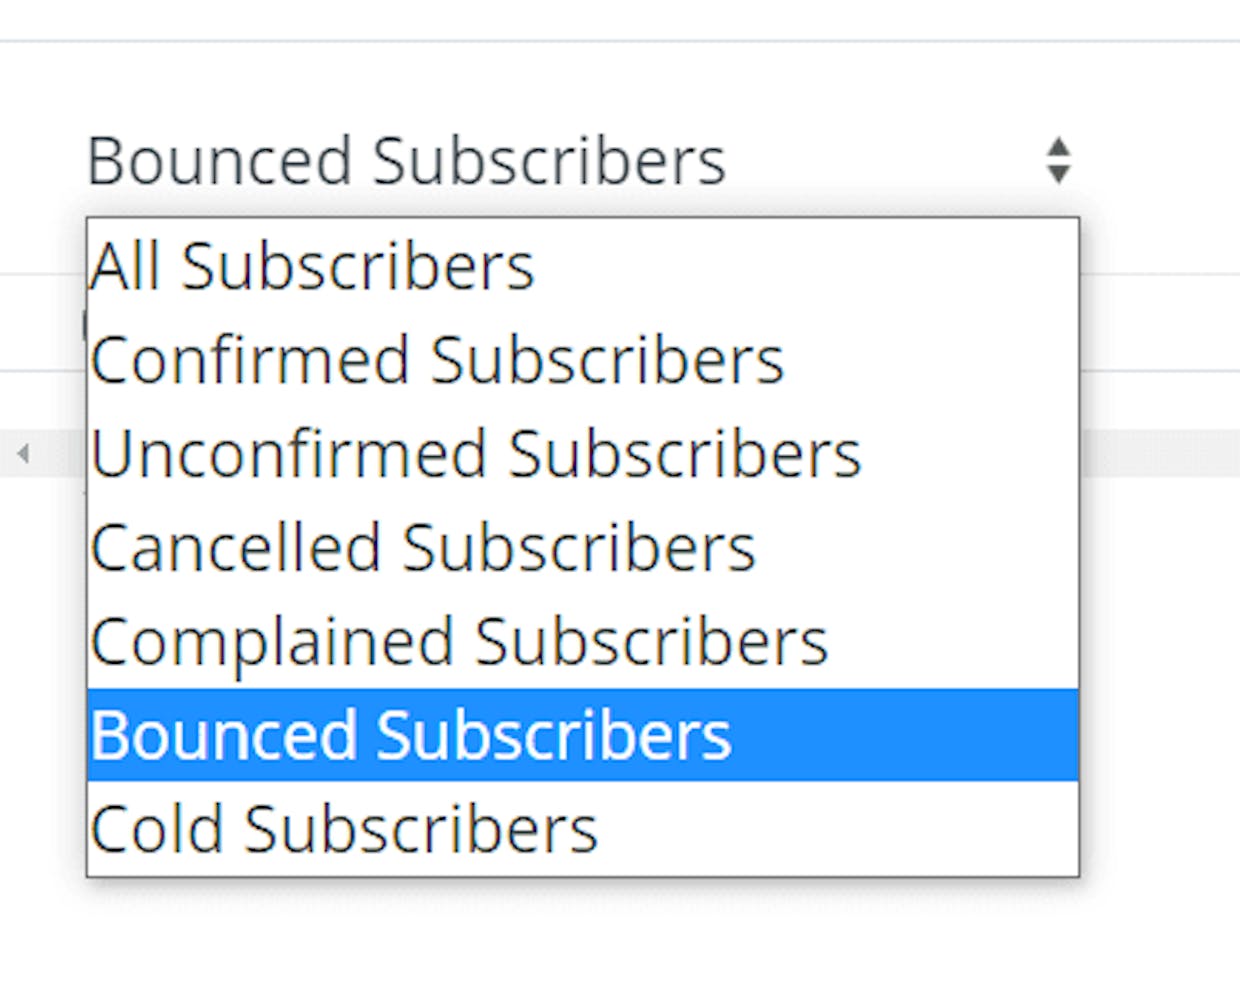 I would like to see soft bounces! (quite a basic feature I would have thought?)

I send an email to 100 people, I need to be able to see who it didn't send to, without having to go through the entire list of 100 subscribers 1 by 1...! 

I suggest this should be in the "recipients" tab of the emails "report"?